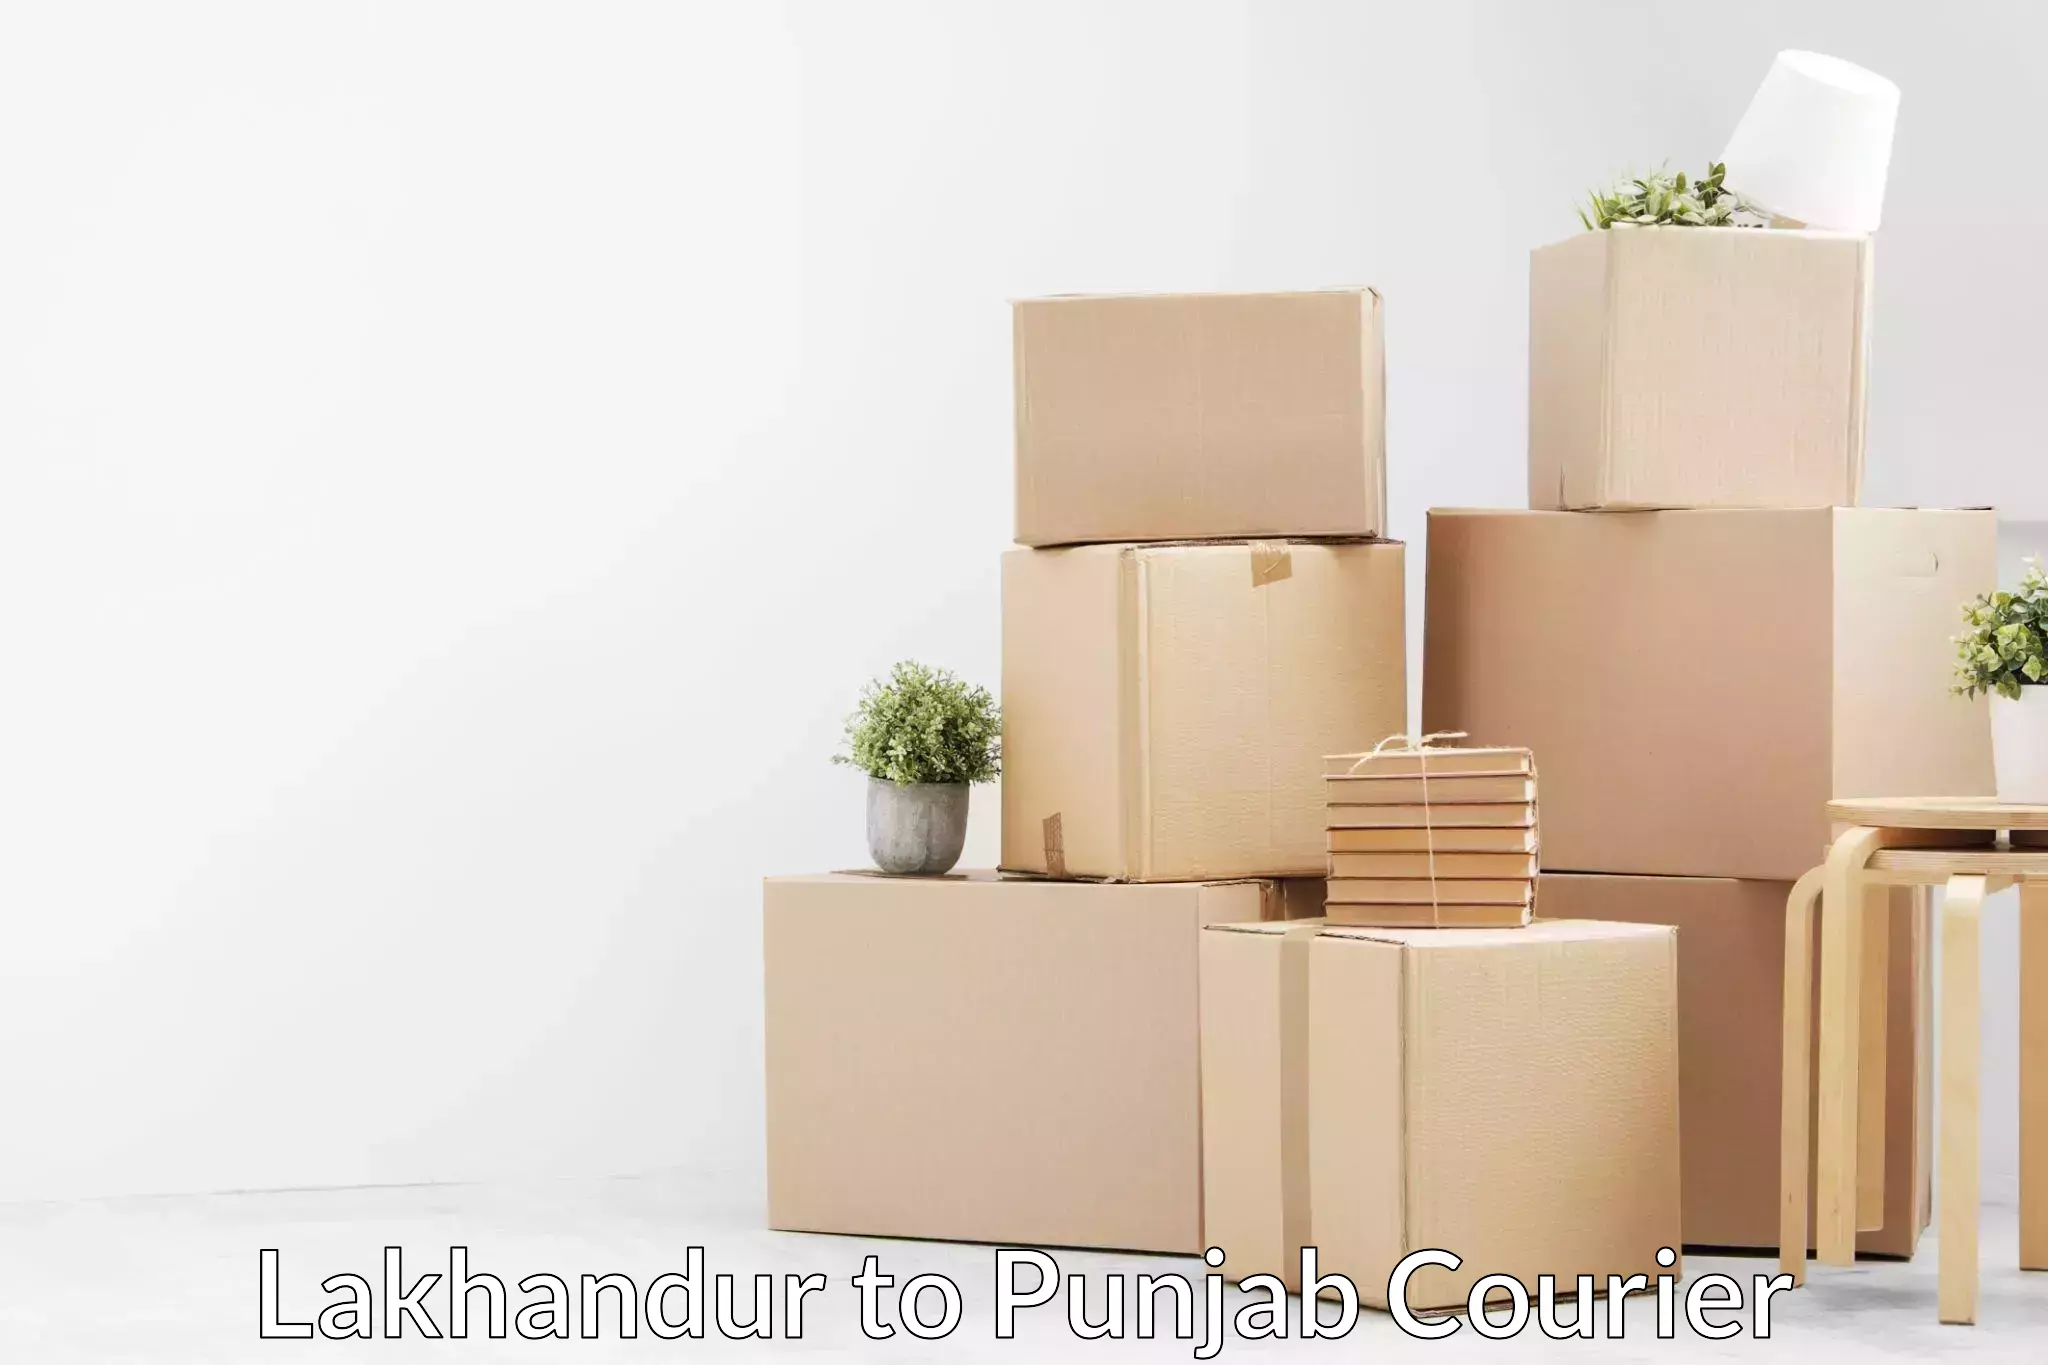 Cost-effective moving solutions Lakhandur to Ludhiana